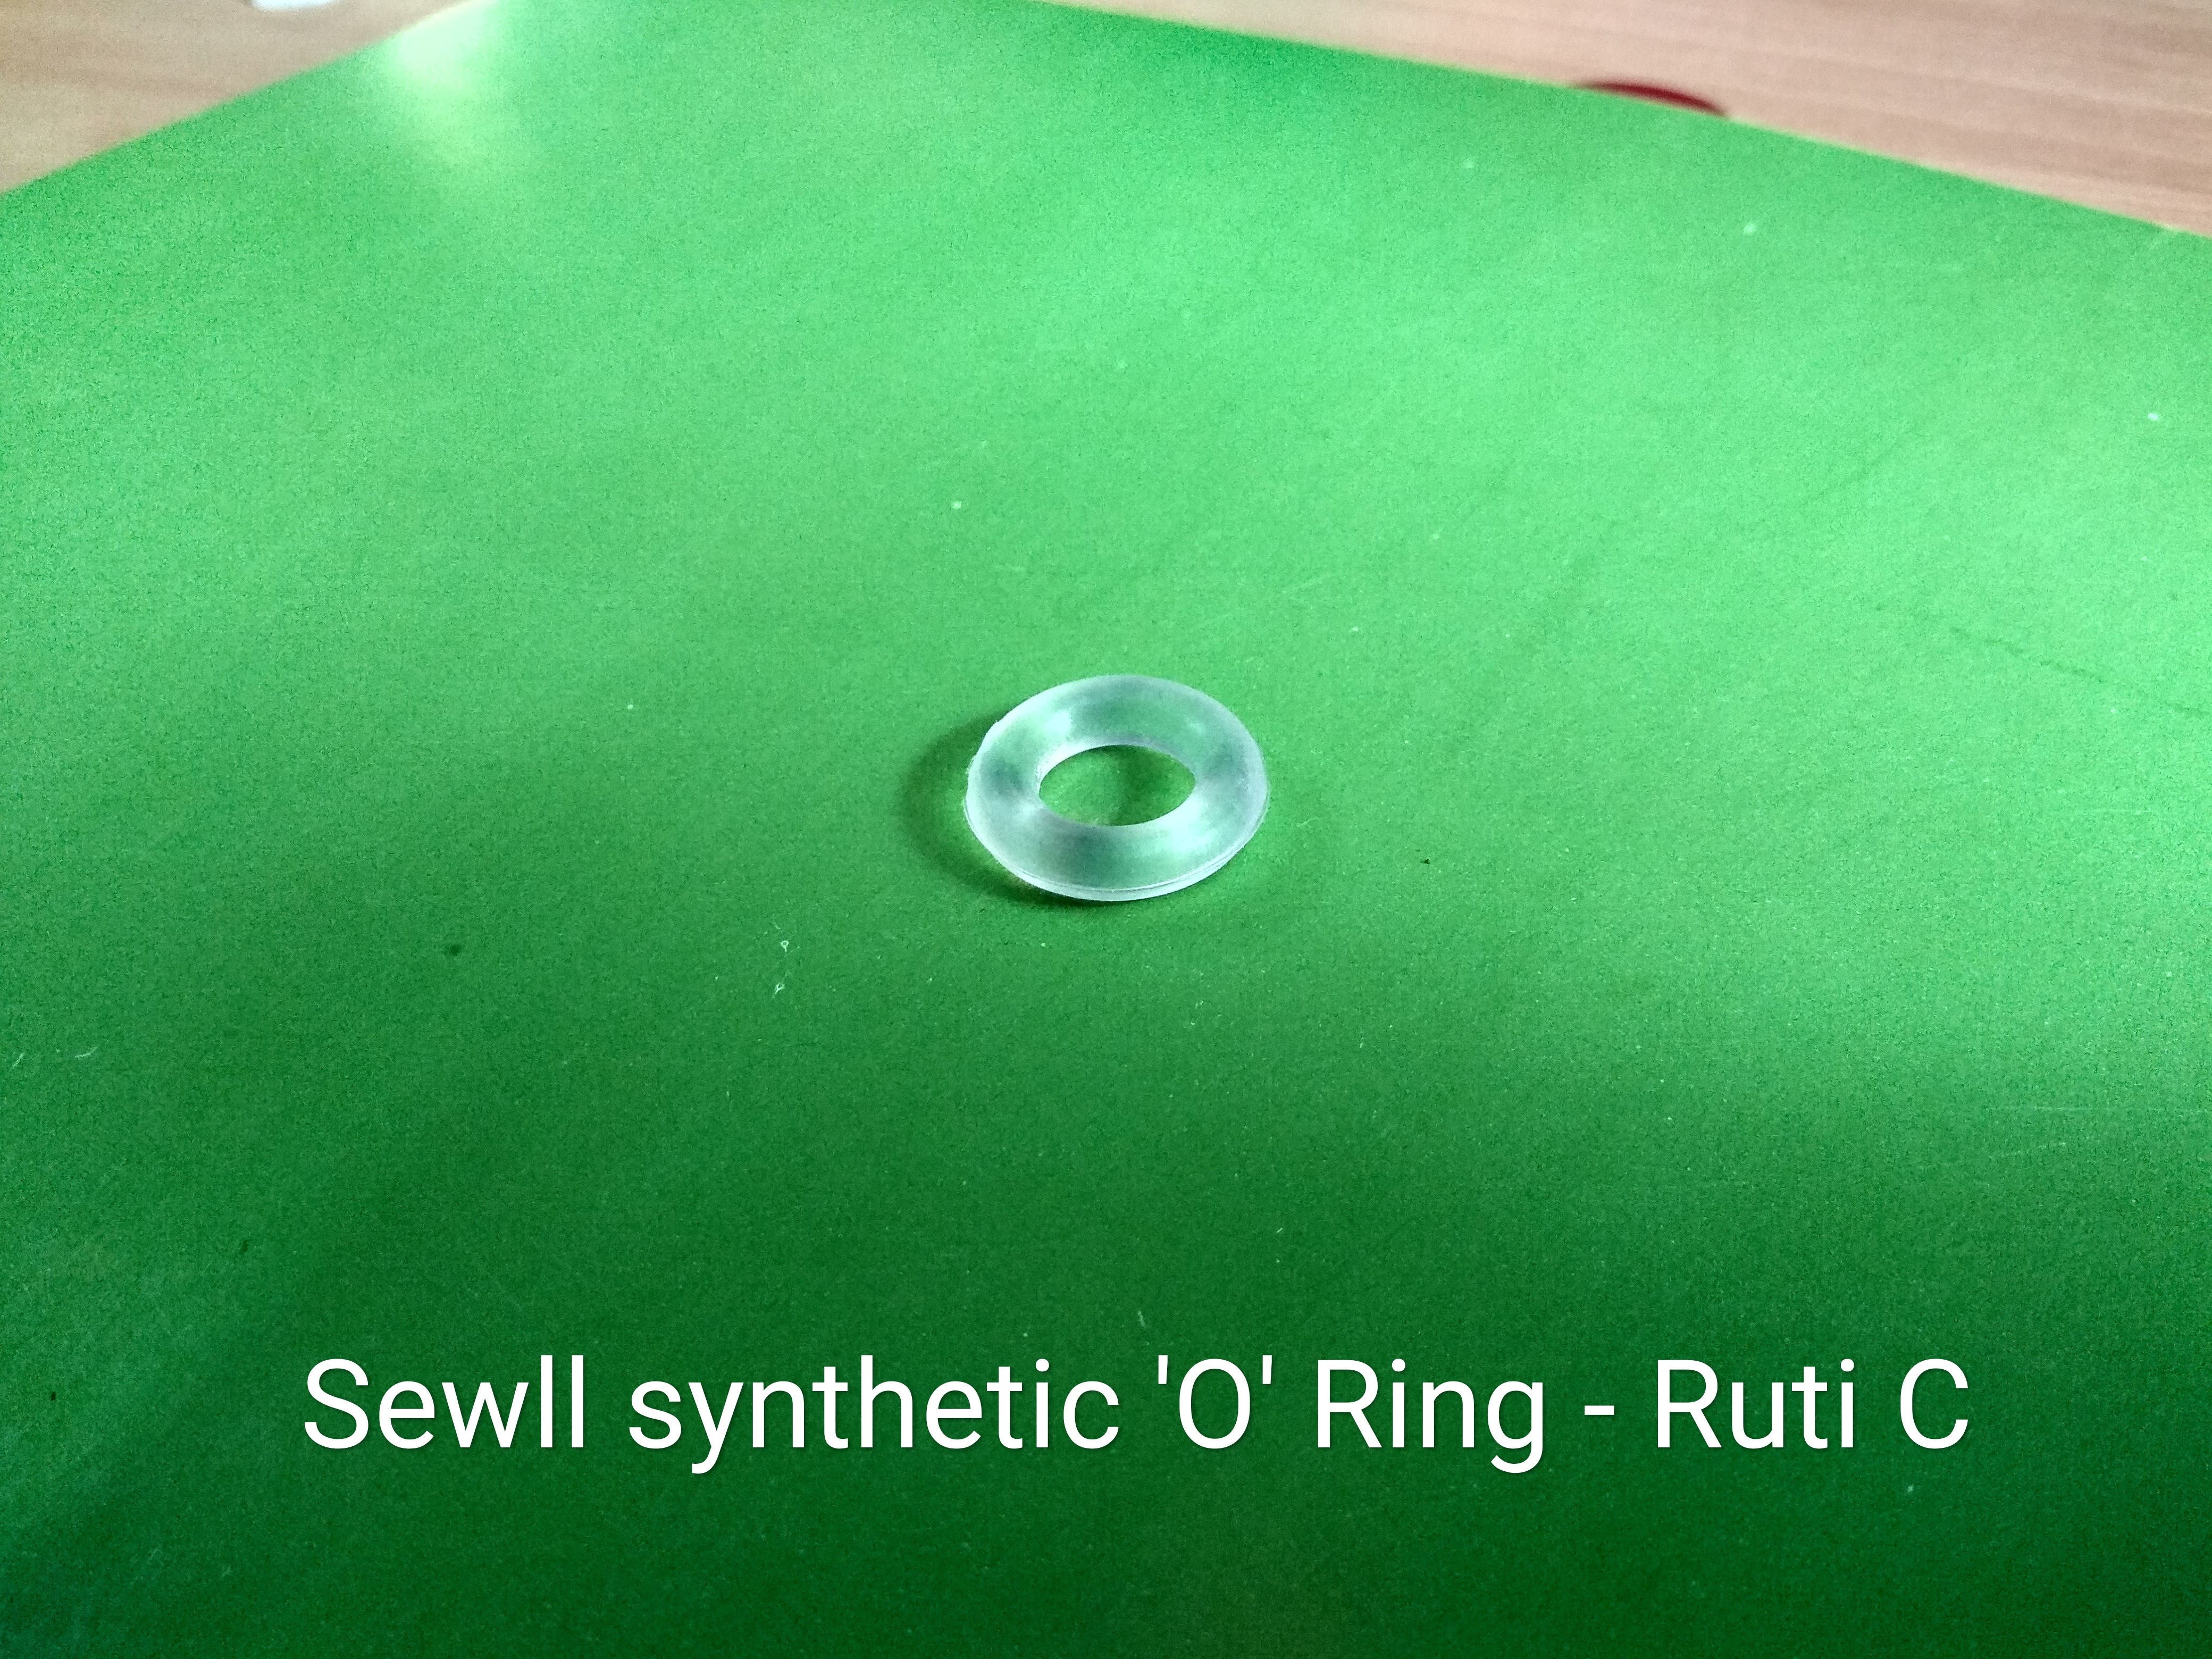 GE_RC_2019_Swell_Synthetic_'O'_Ring_9_18.jpg